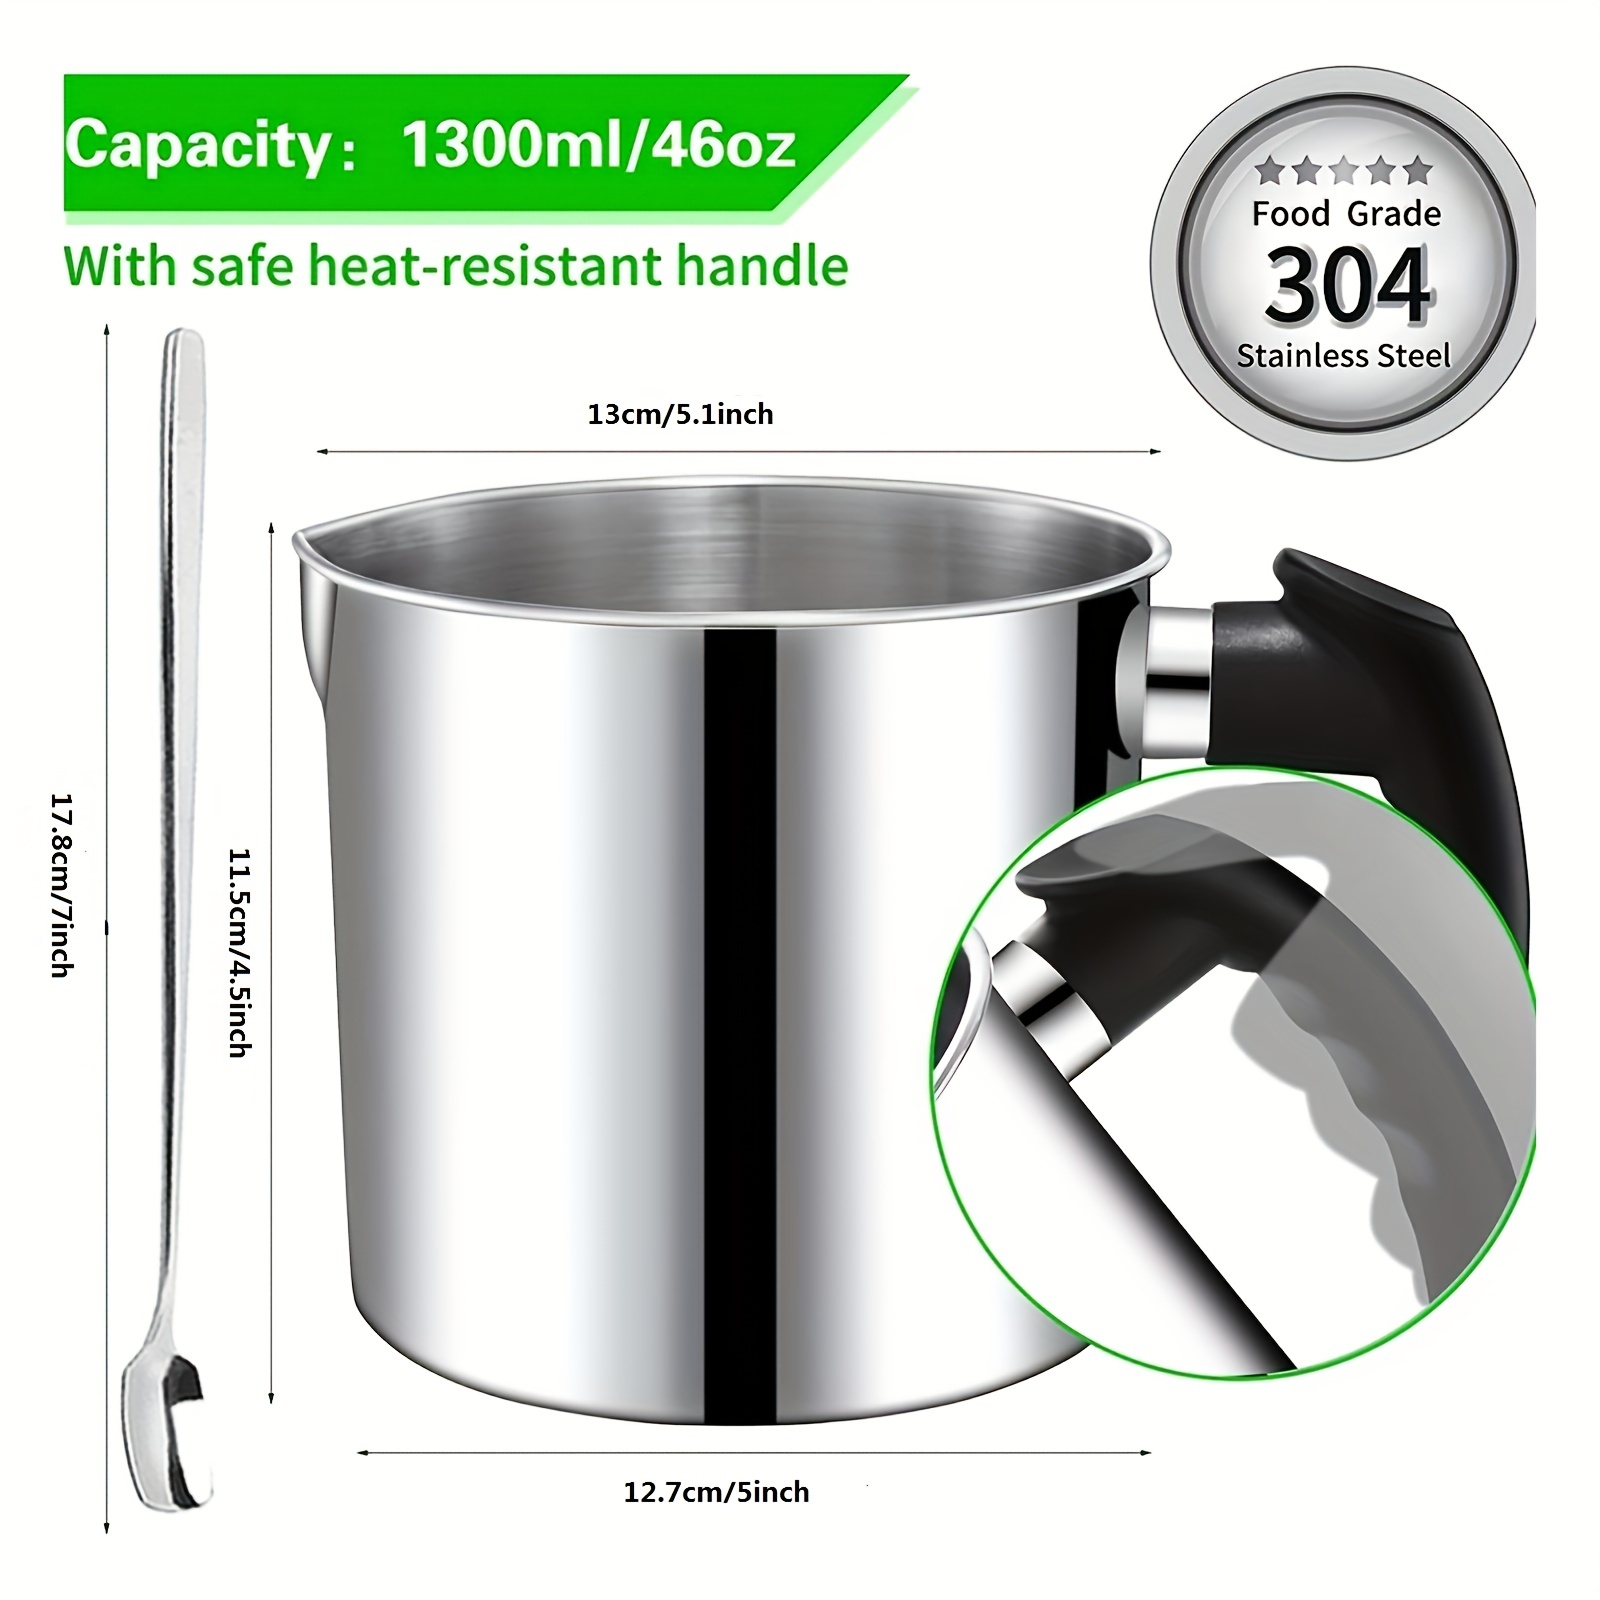 Wax Melting Pot, Stainless Steel Candle Wax Melting Pouring Cup Candle  Making Pot DIY Candle Tool with Handle, Pouring Pitcher